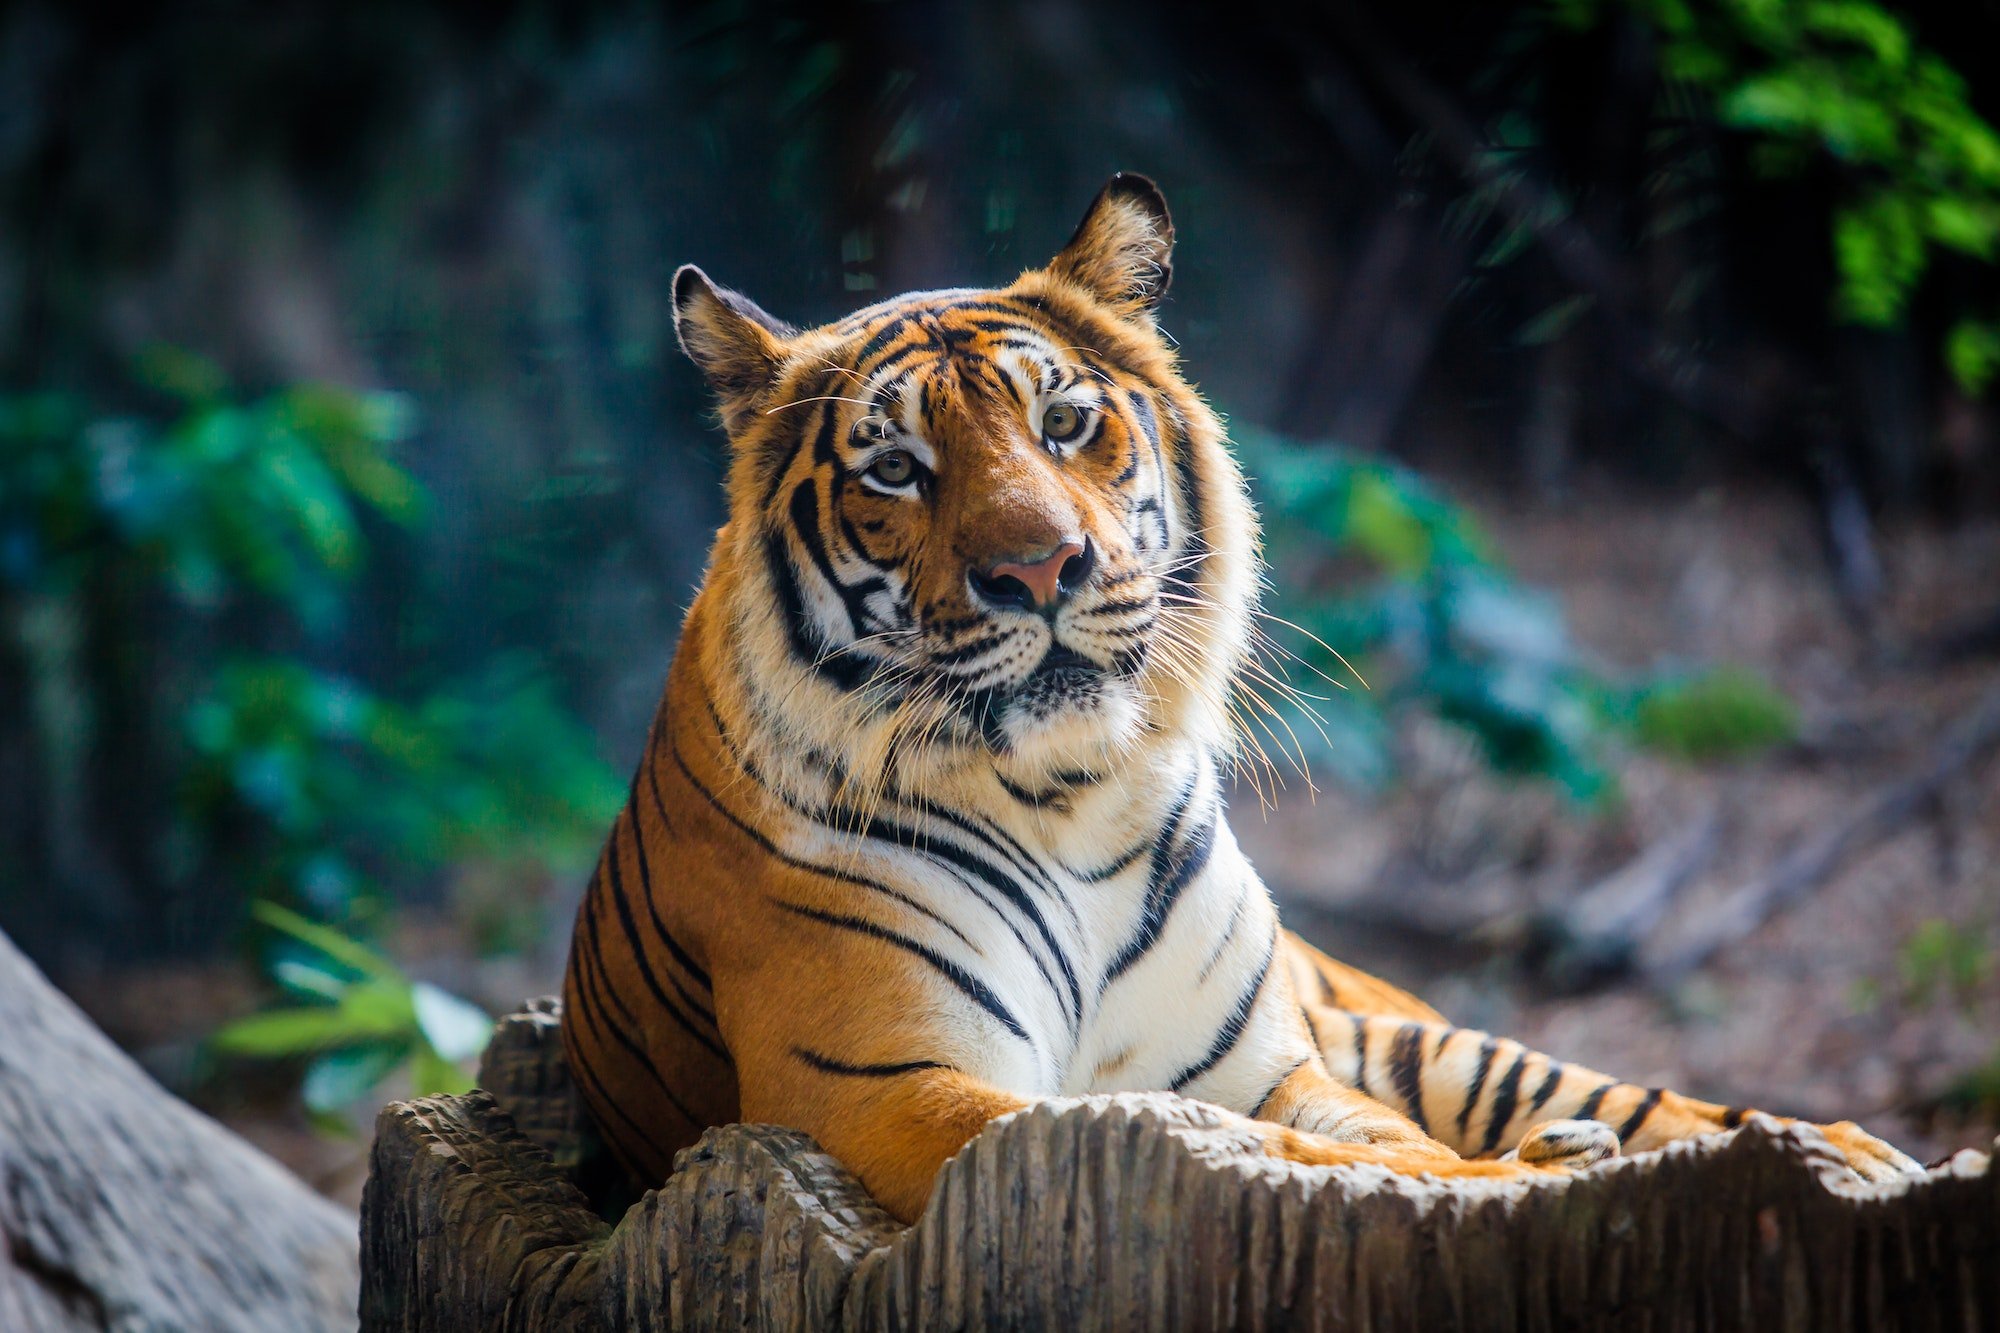 Tiger, portrait of a bengal tiger. A tiger sitting in a zoo.